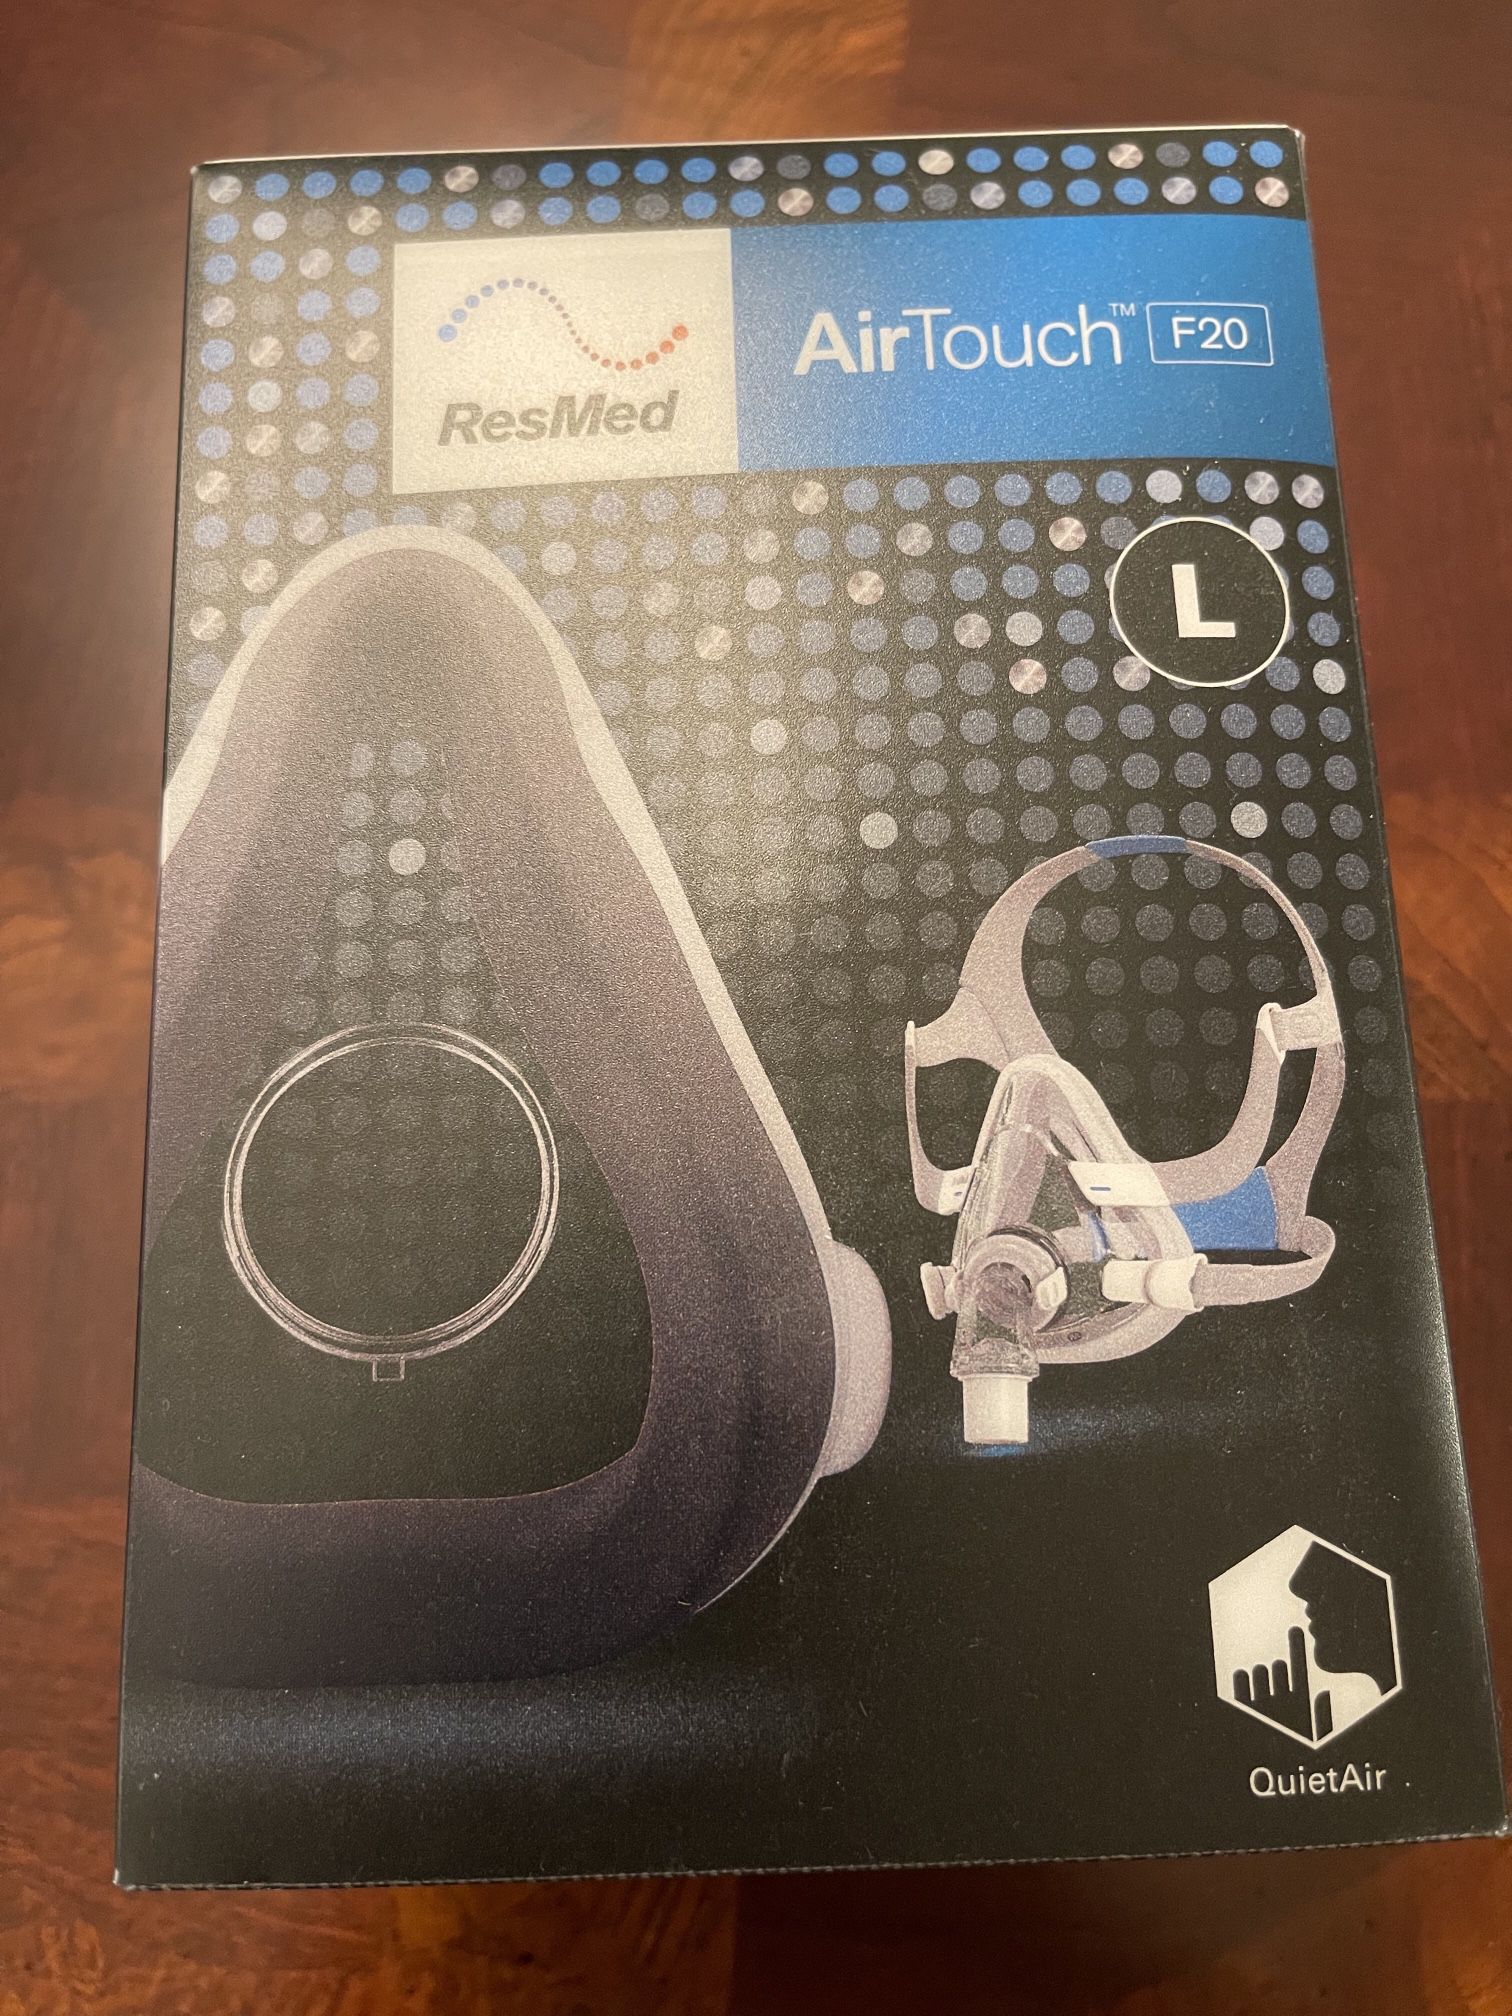 CPAP ResMed AirTouch F20 Full Face CPAP Mask with Headgear-3 EACH $75.00 EACH - Brand New